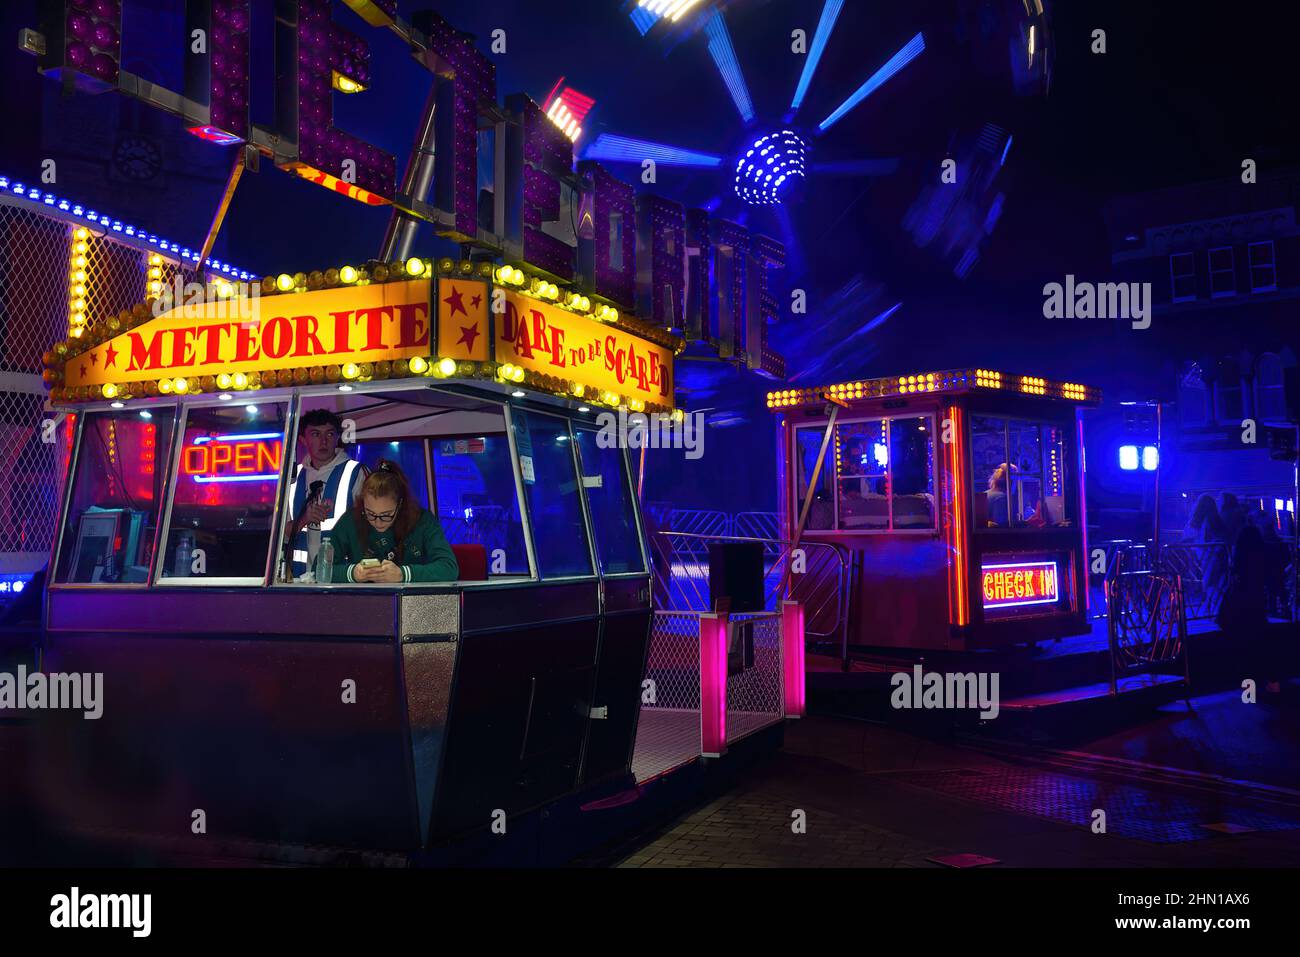 Abingdon Street Fair at Night - Payment booths for rides in motion - October 2021 Stock Photo